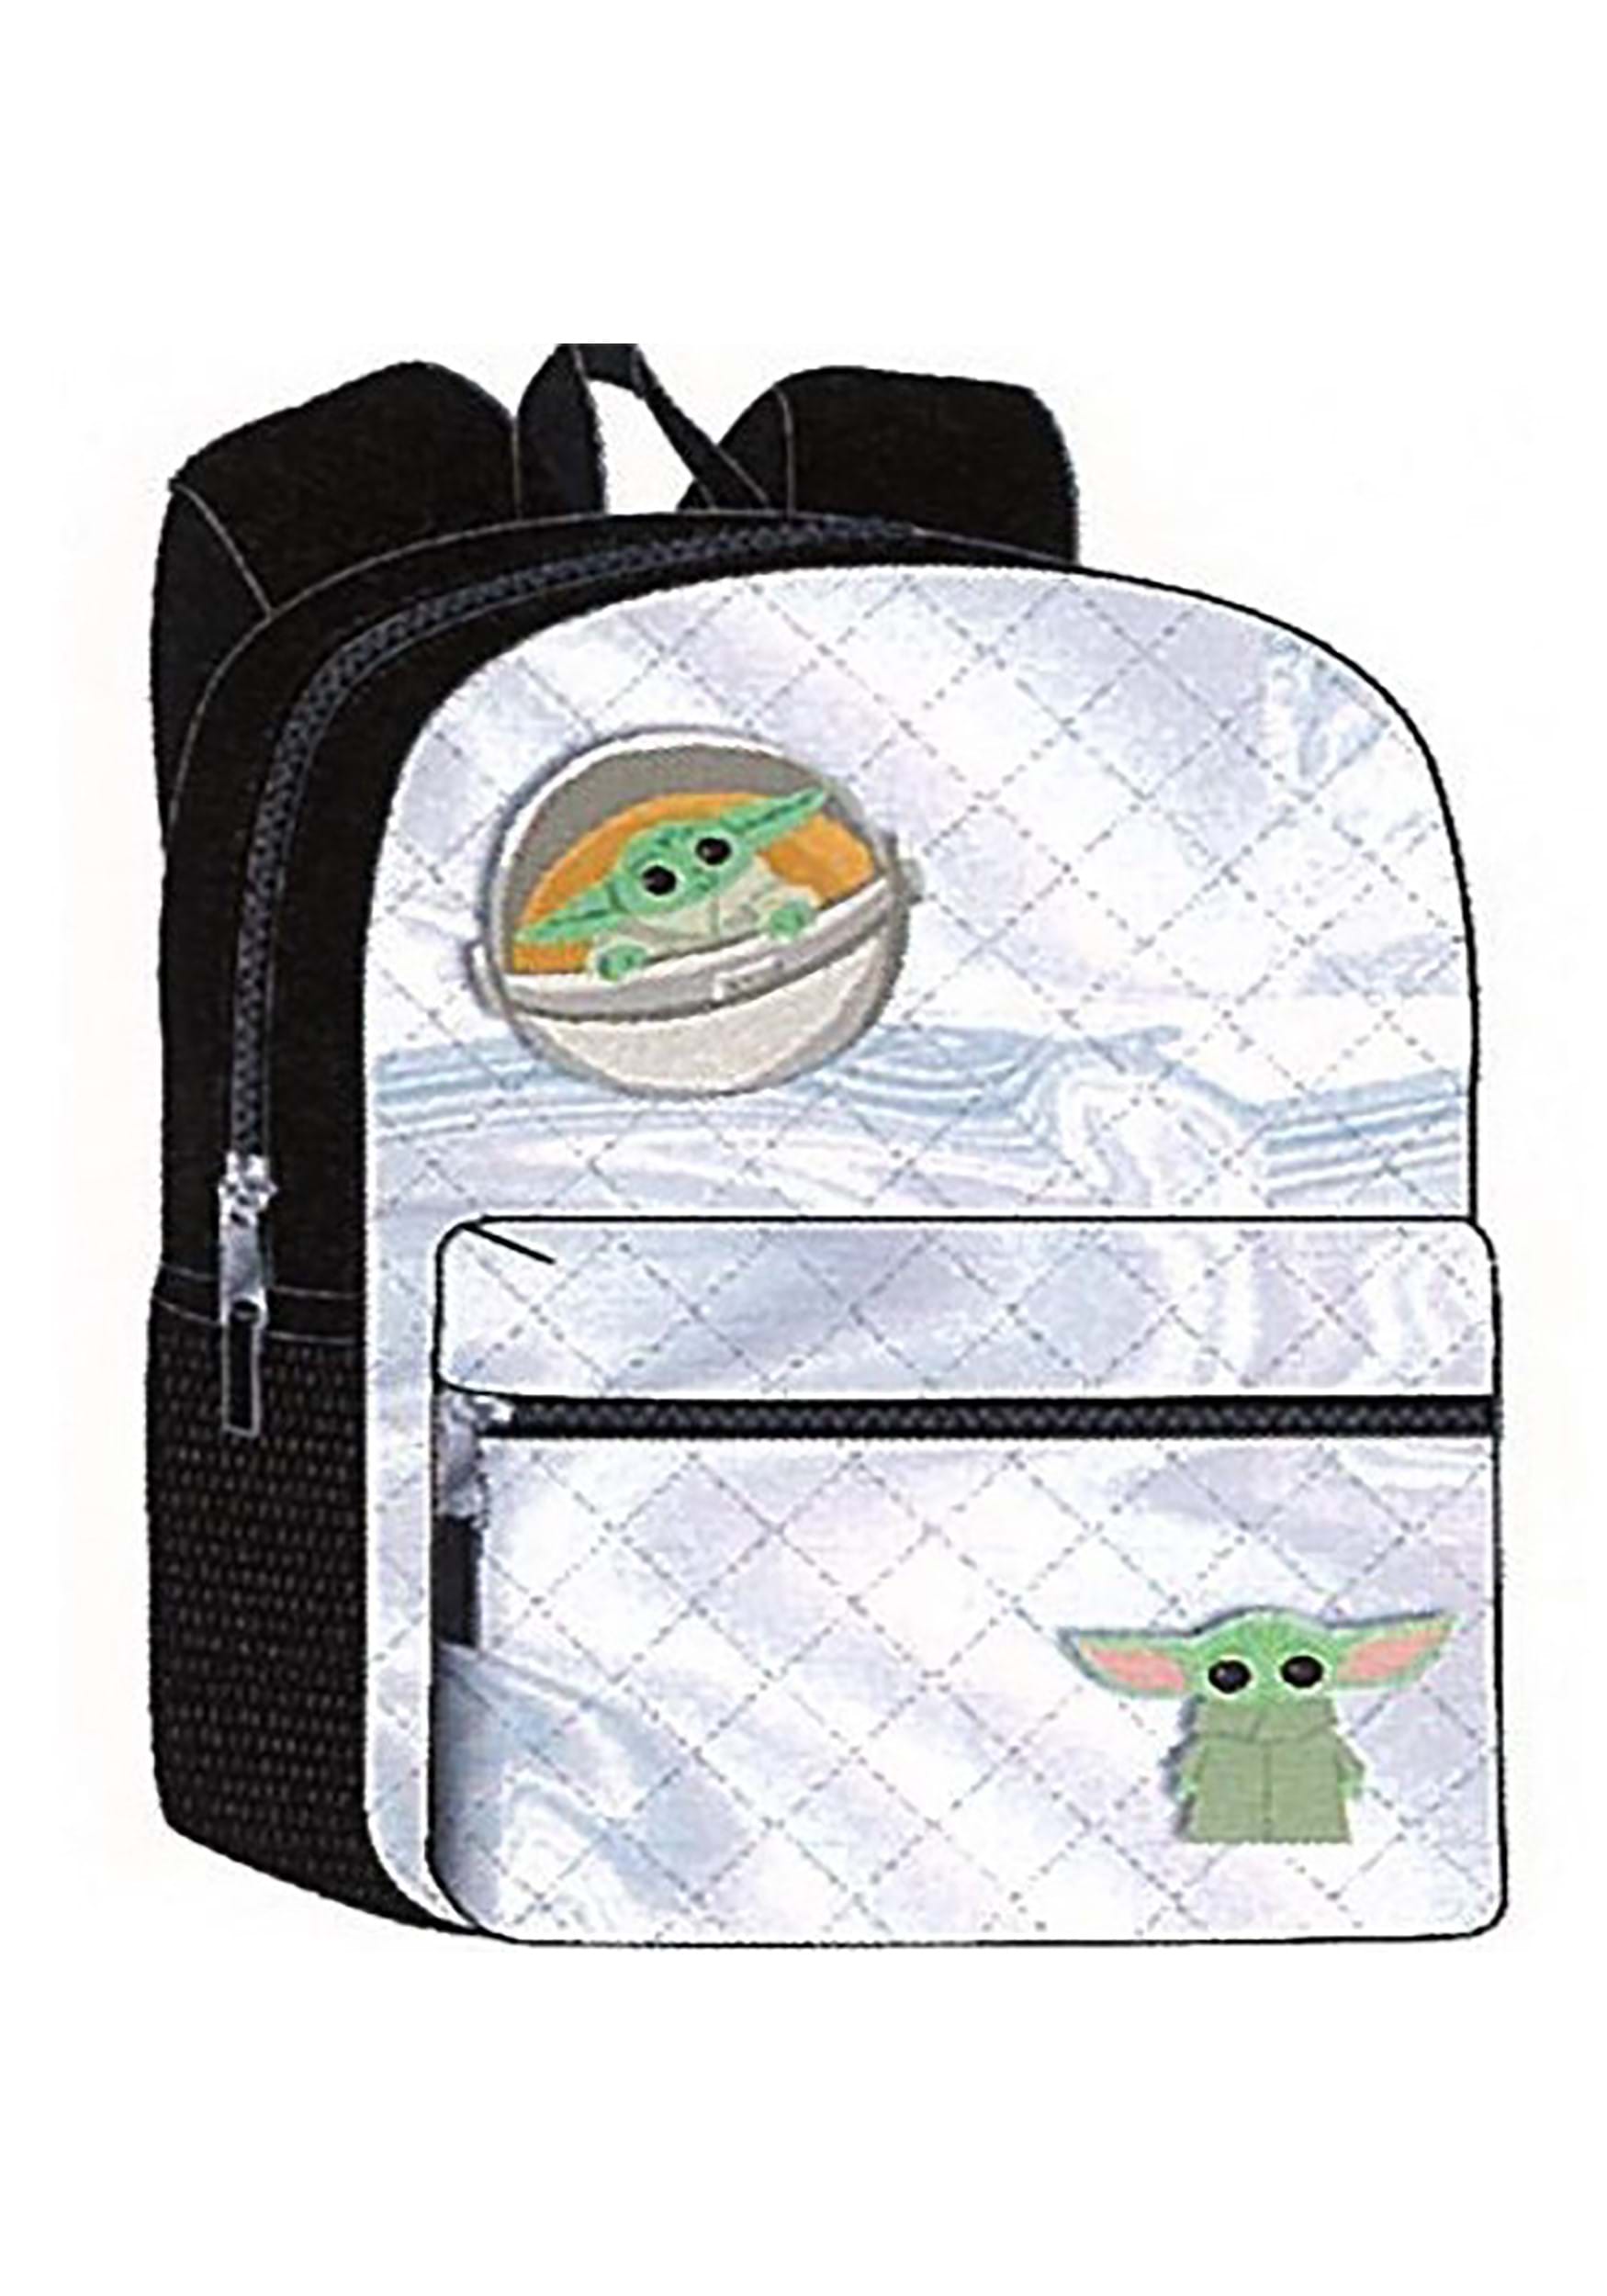 16" Star Wars "The Child" Baby Yoda Shiny Quilted Backpack